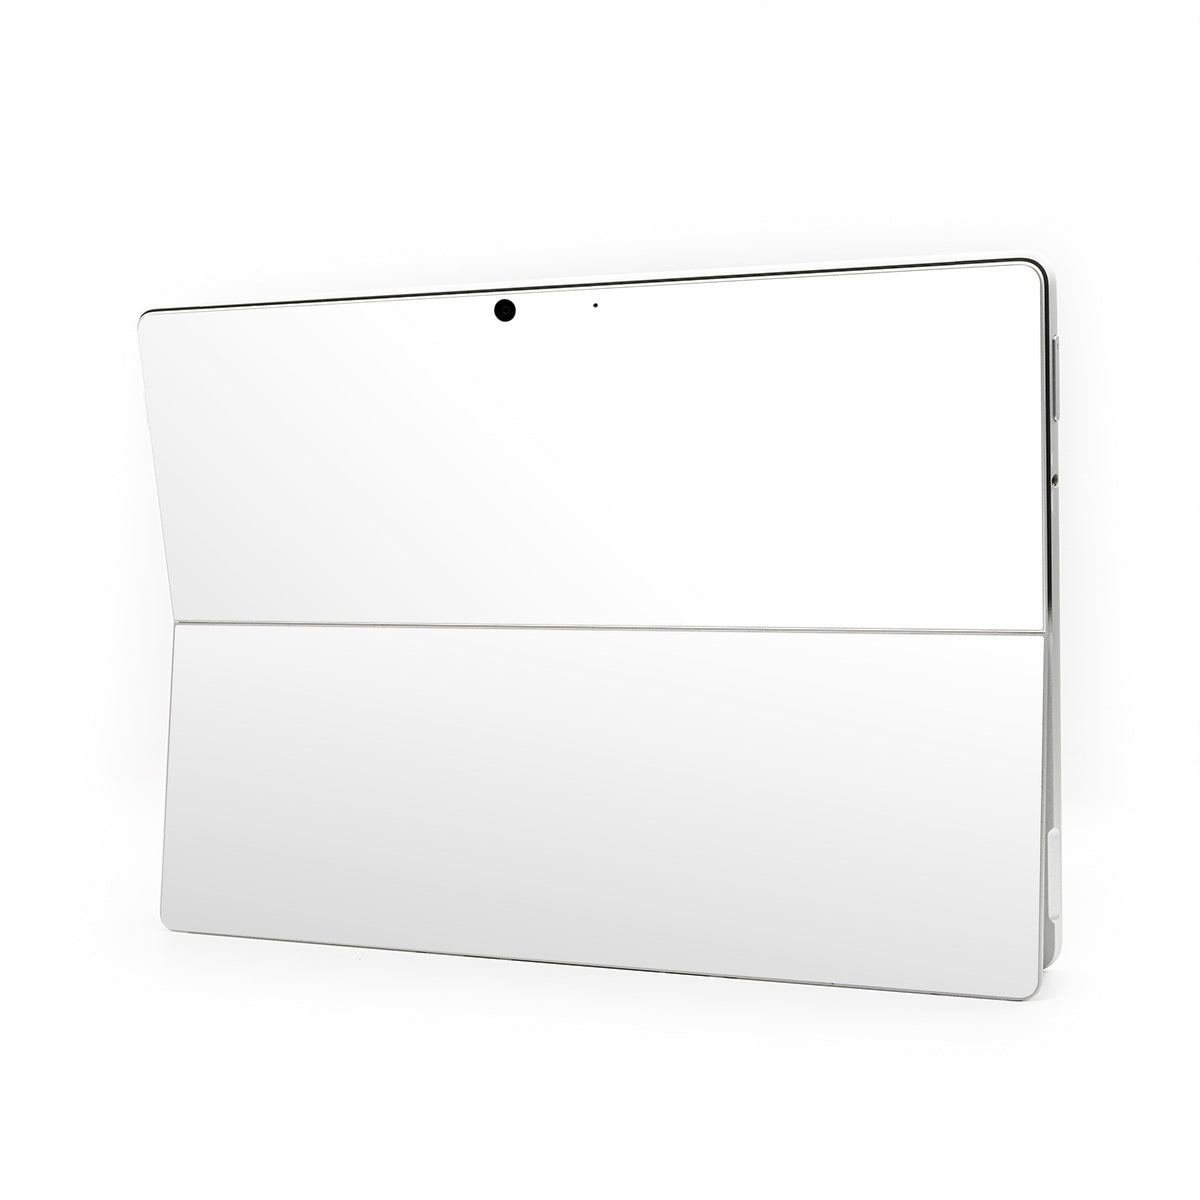 Solid State White - Microsoft Surface Pro Skin